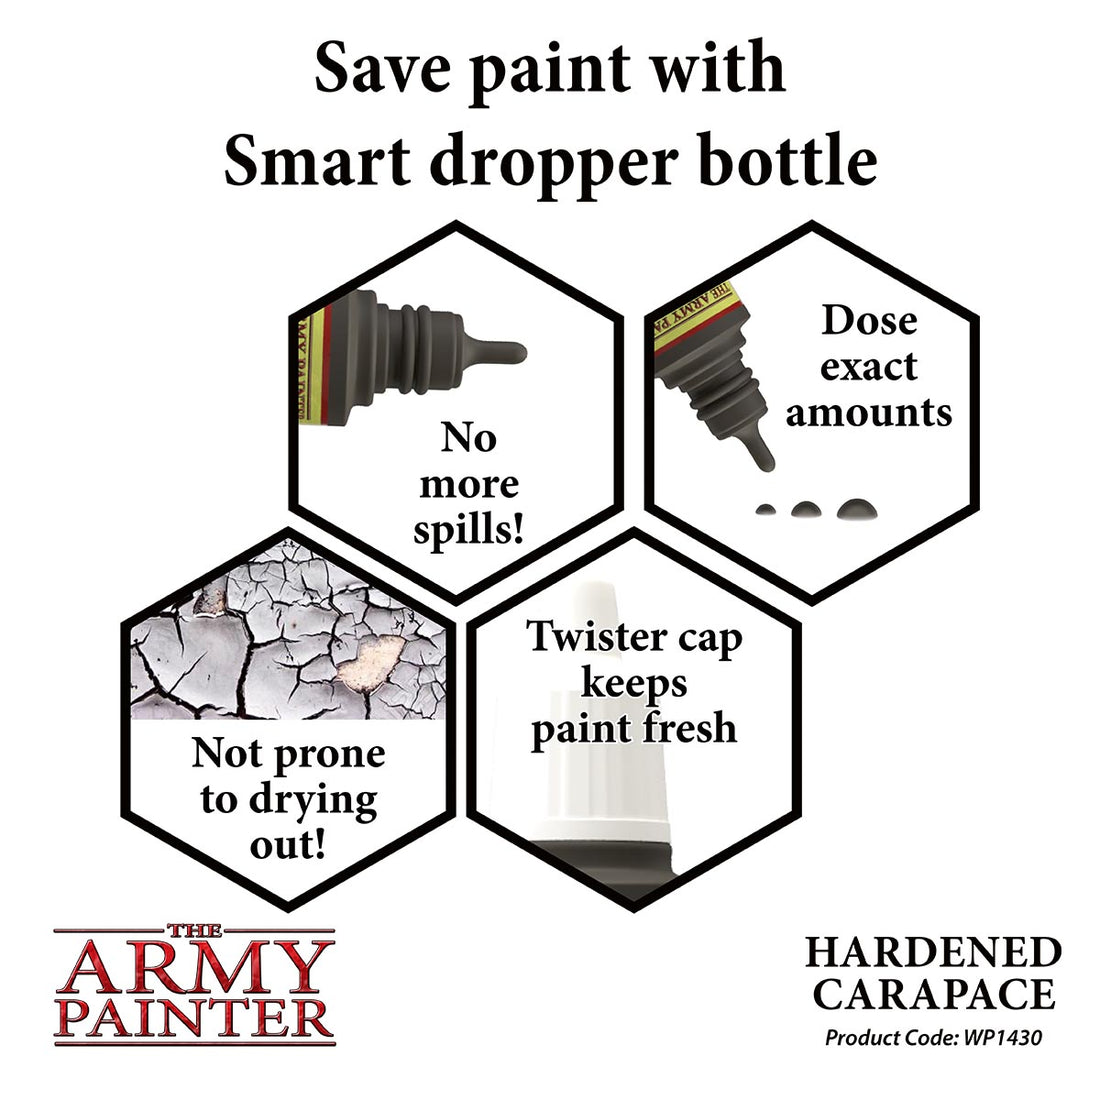 Army Painter: Warpaints: Hardened Carapace